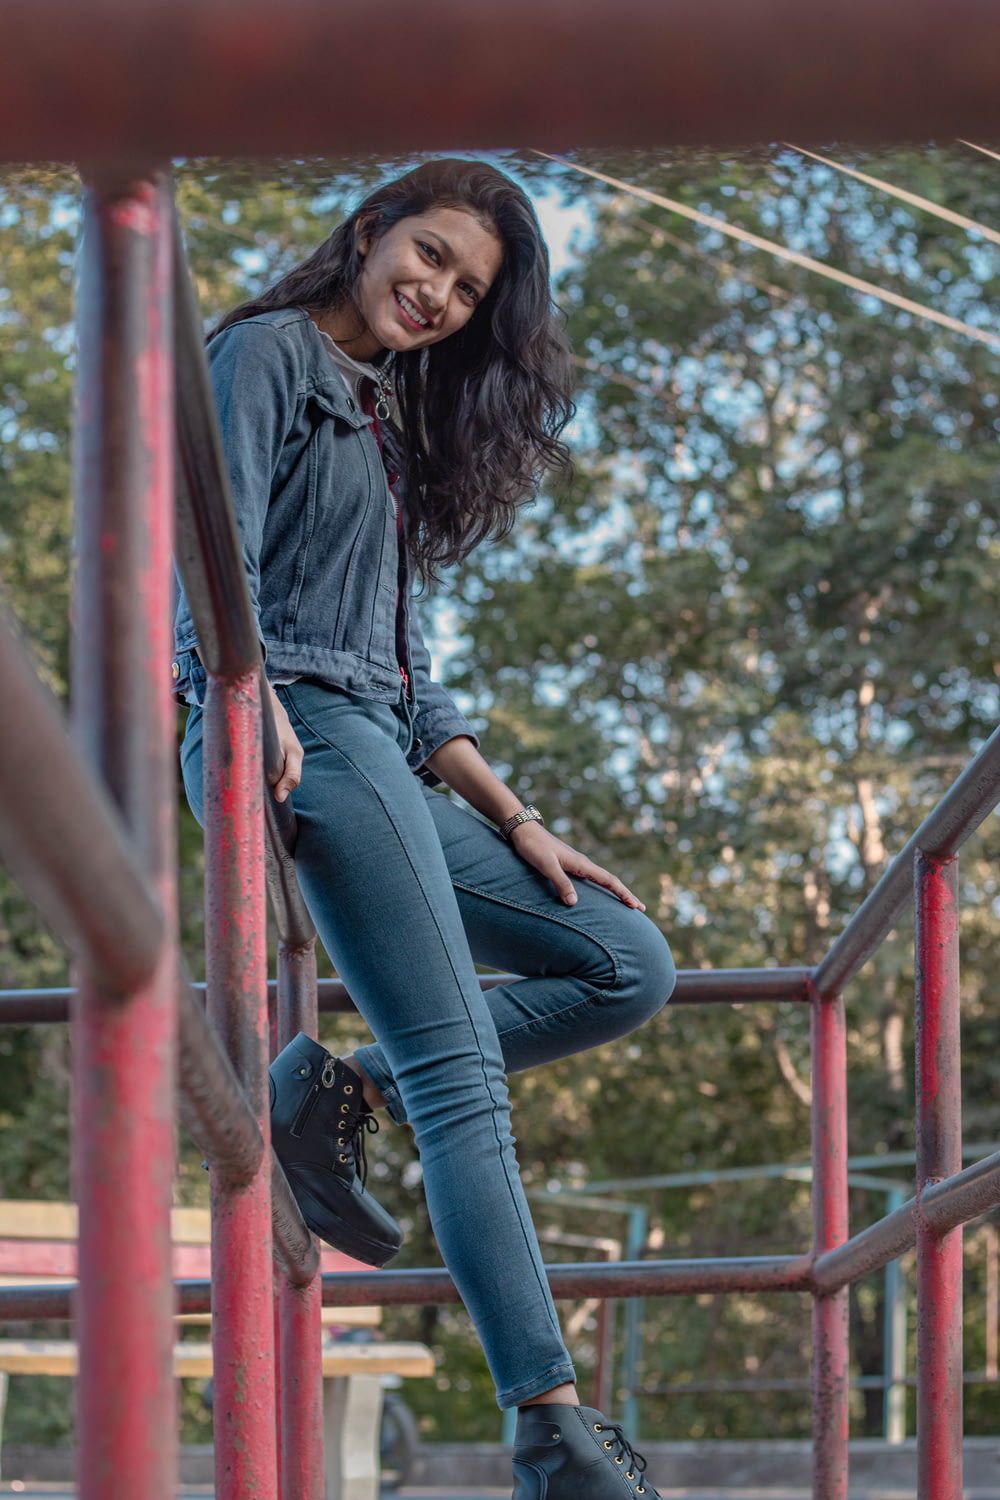 woman in blue denim jeans sitting on red metal railings during daytime